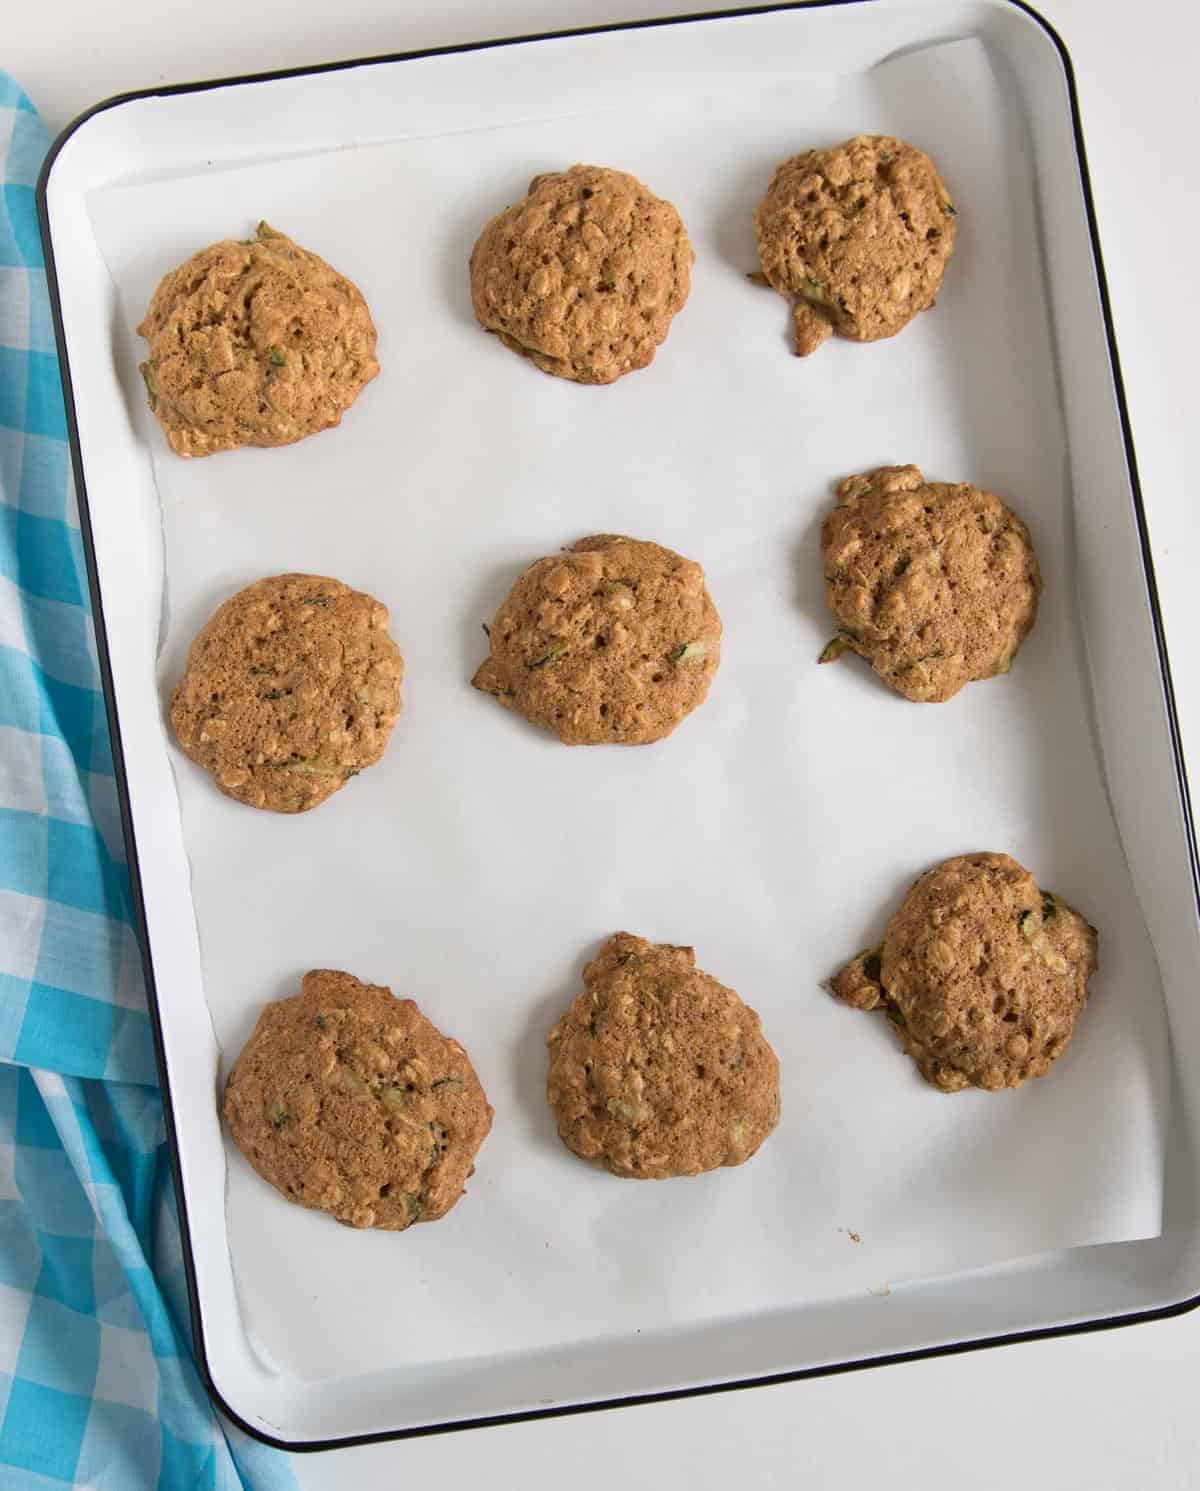 Zucchini Oatmeal Cookies are surprisingly light and fluffy cookies made from oats and shredded zucchini.